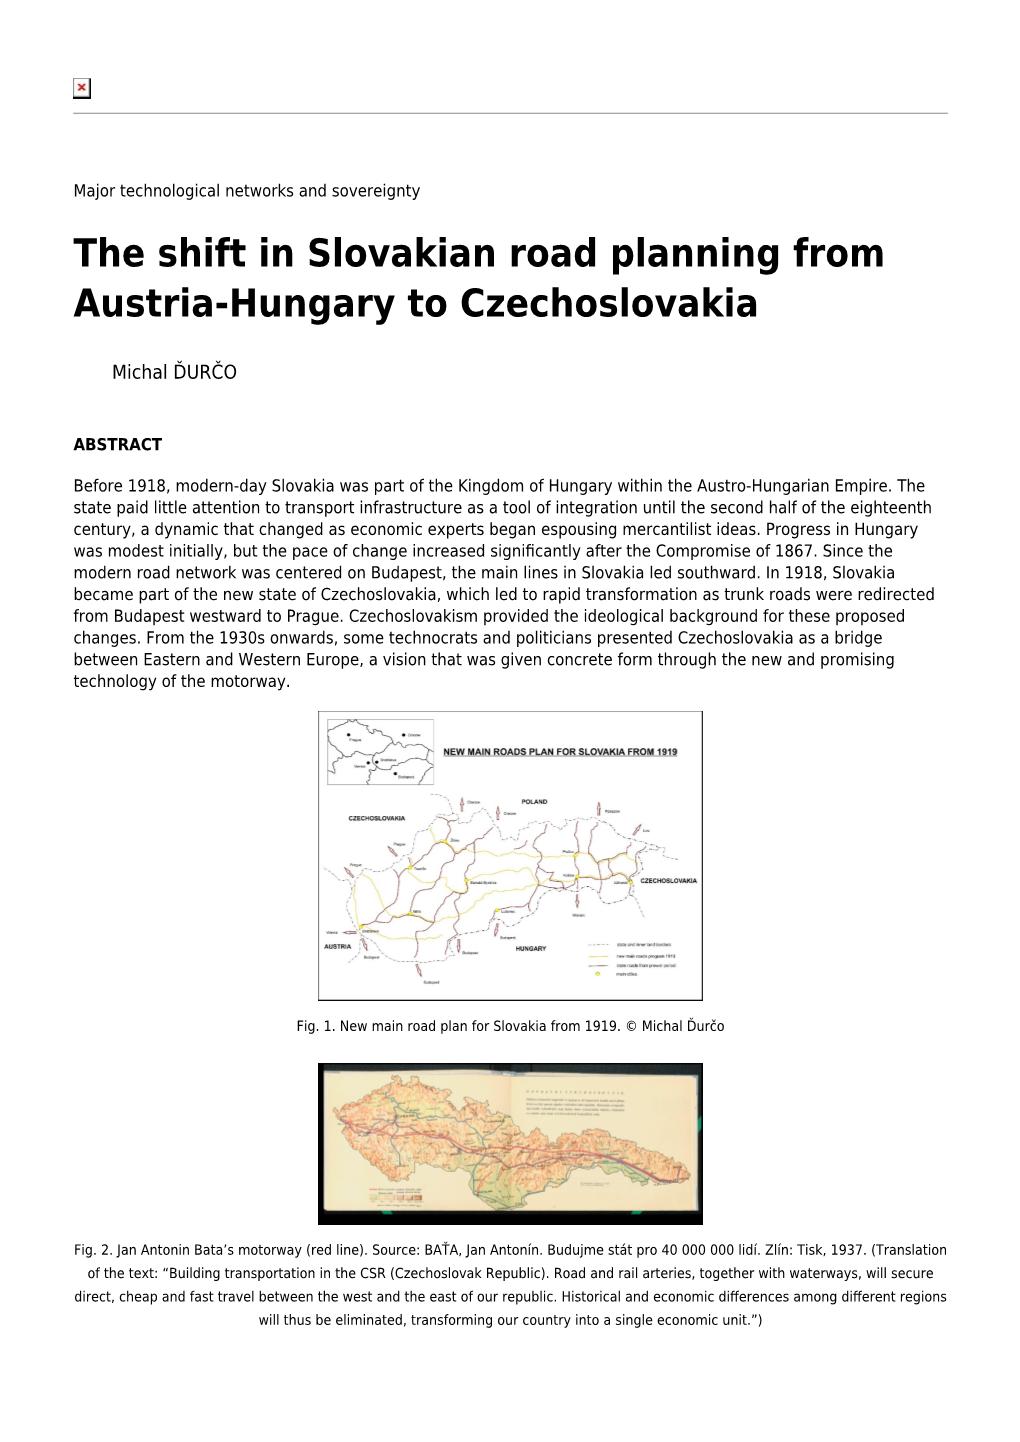 The Shift in Slovakian Road Planning from Austria-Hungary to Czechoslovakia